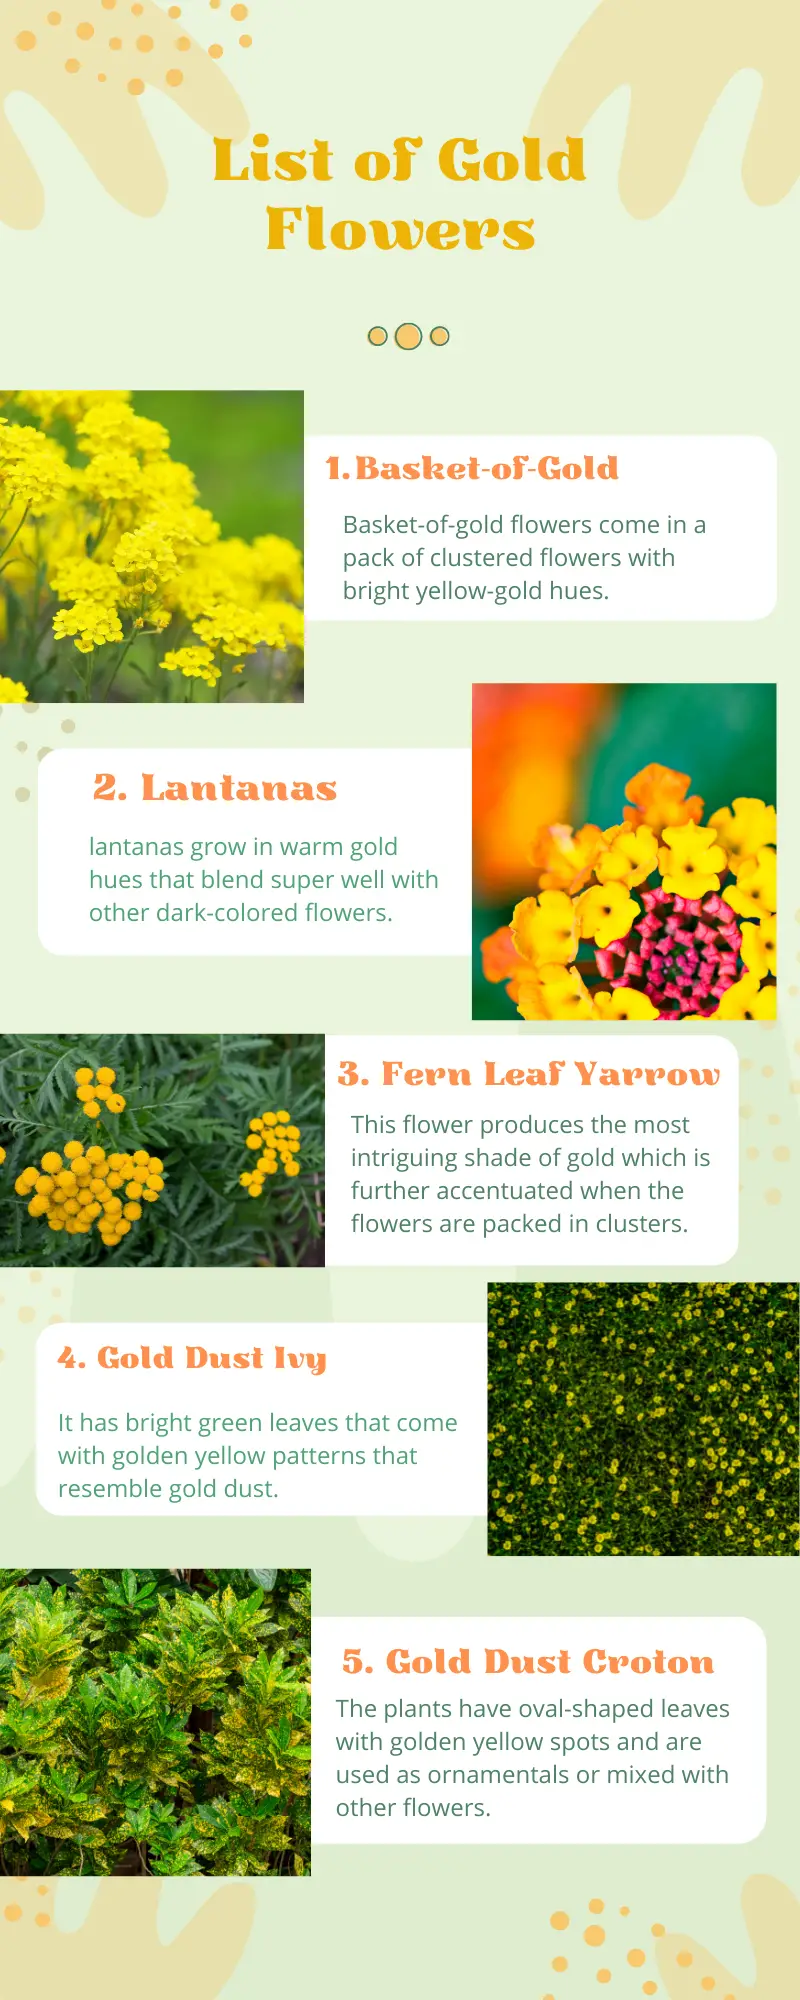 5 golden flower names and pictures